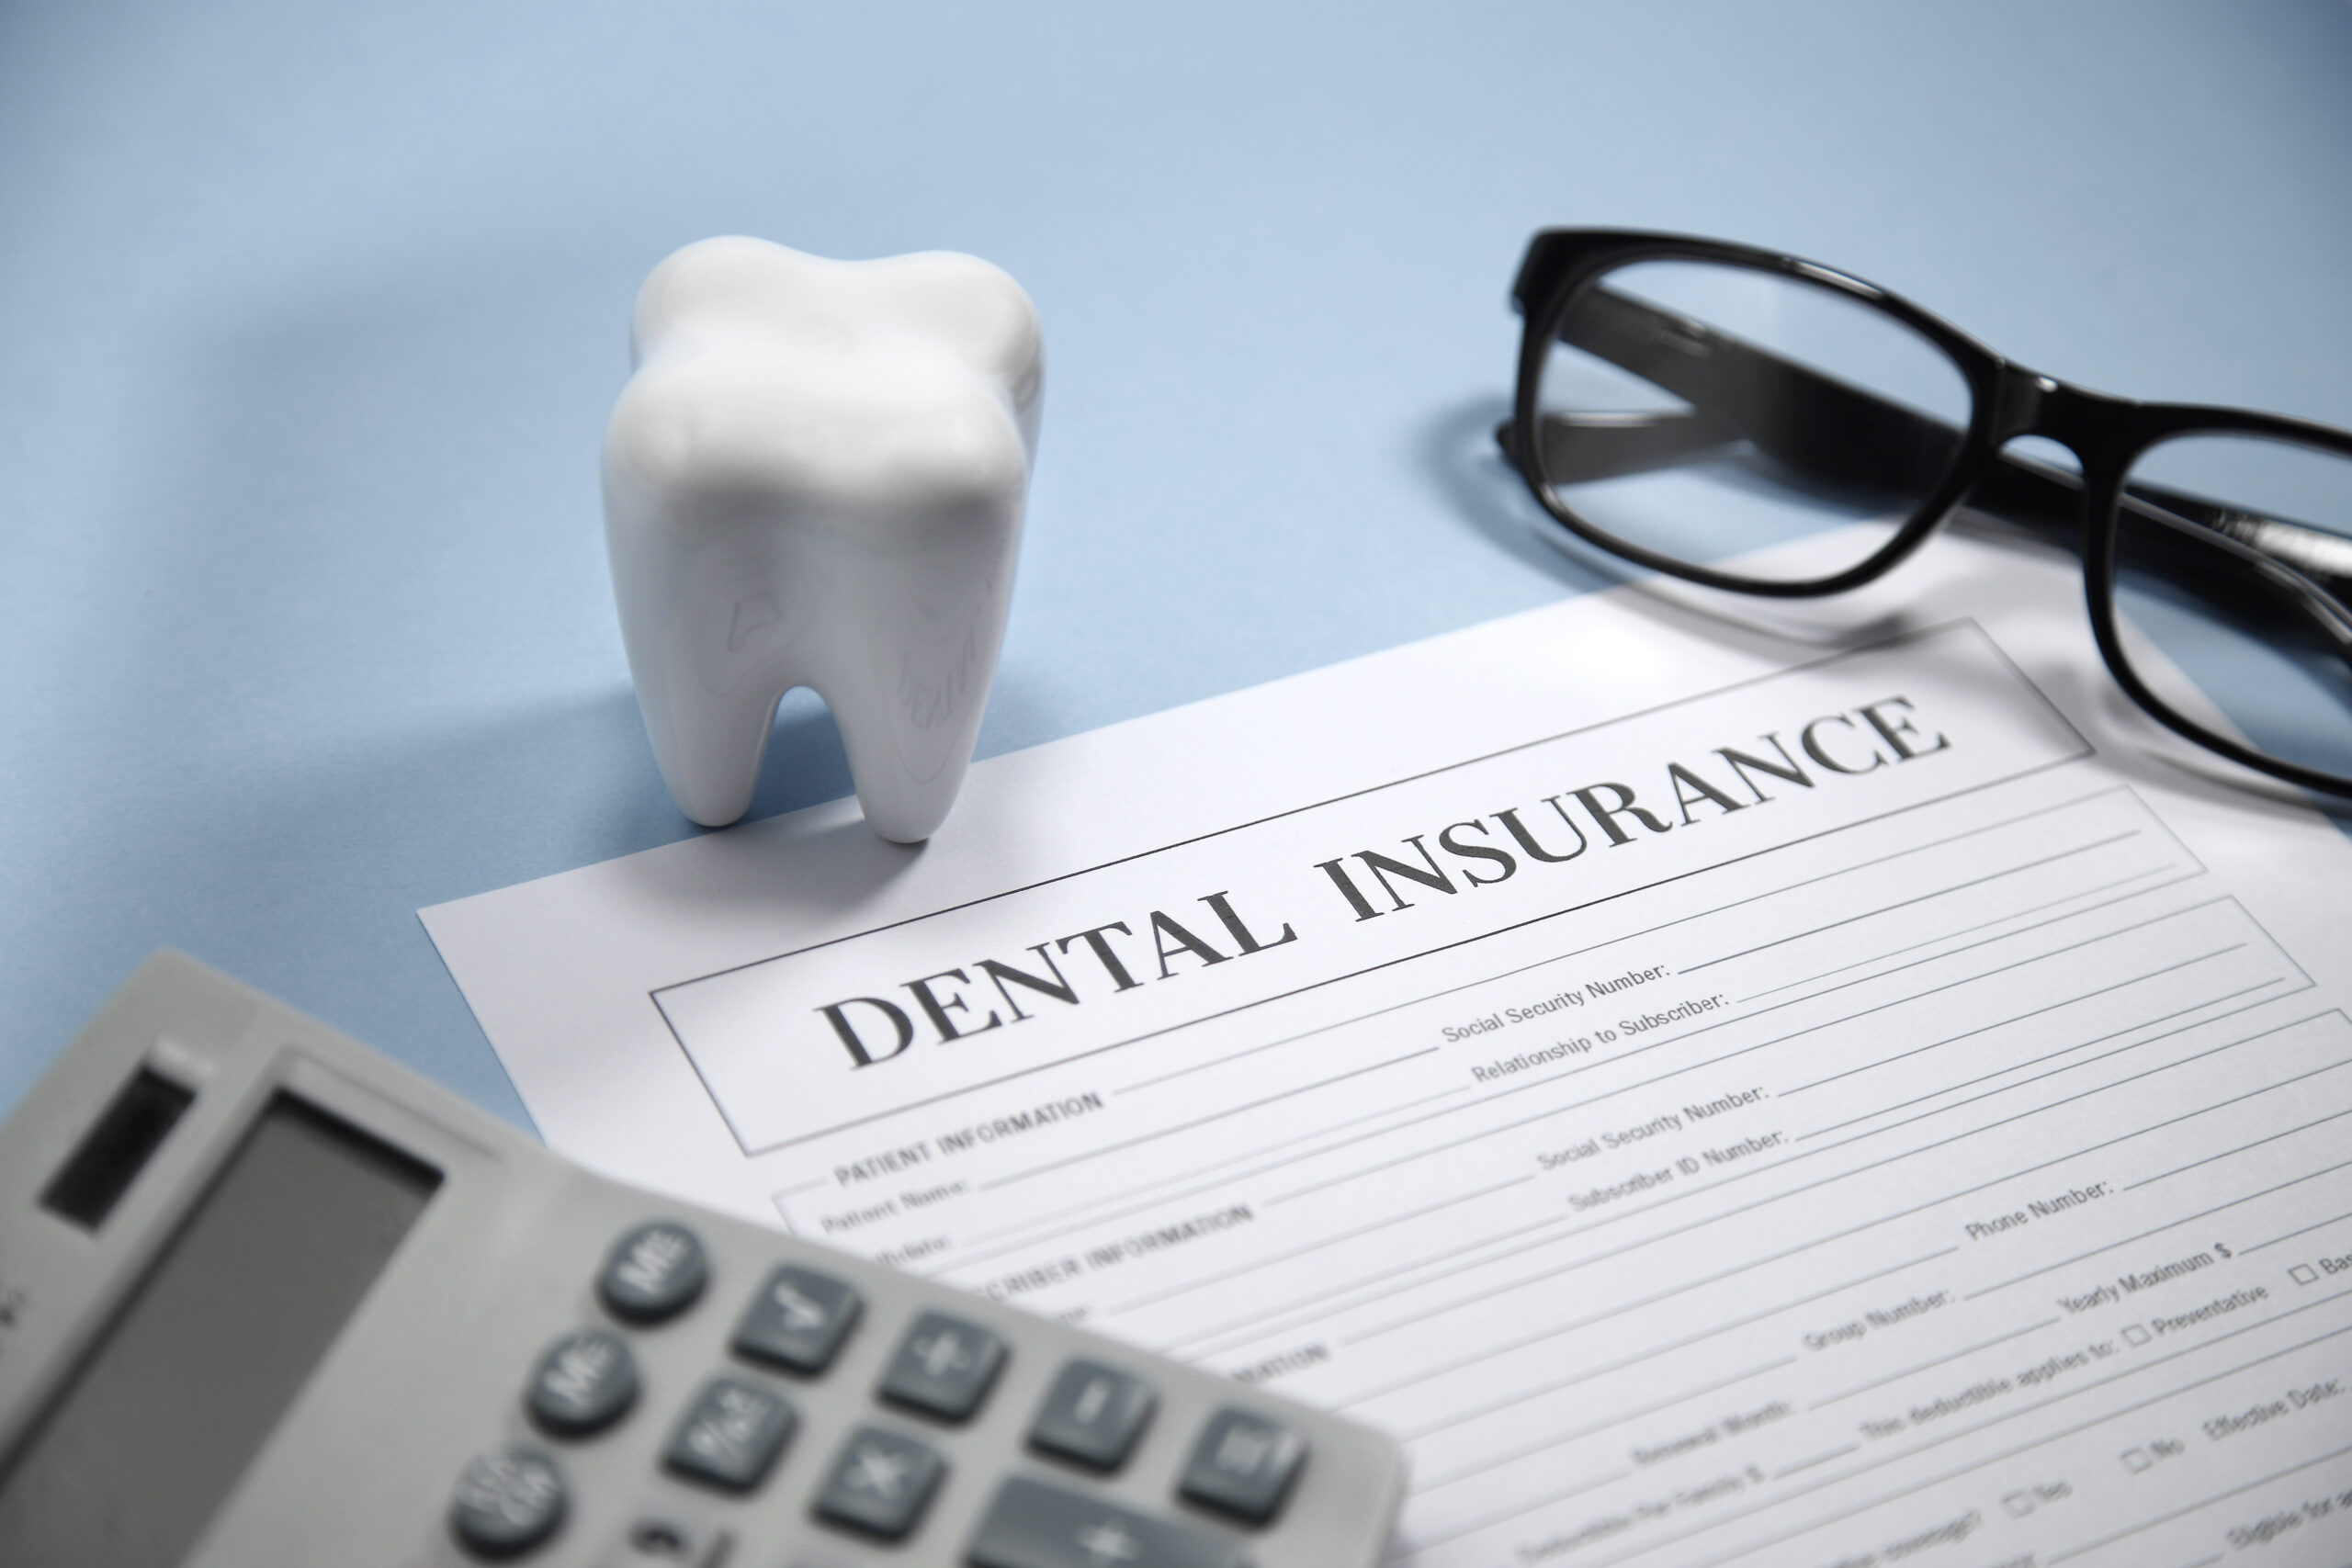 7 Ways Having Good Dental Insurance Can Lead to Better Health